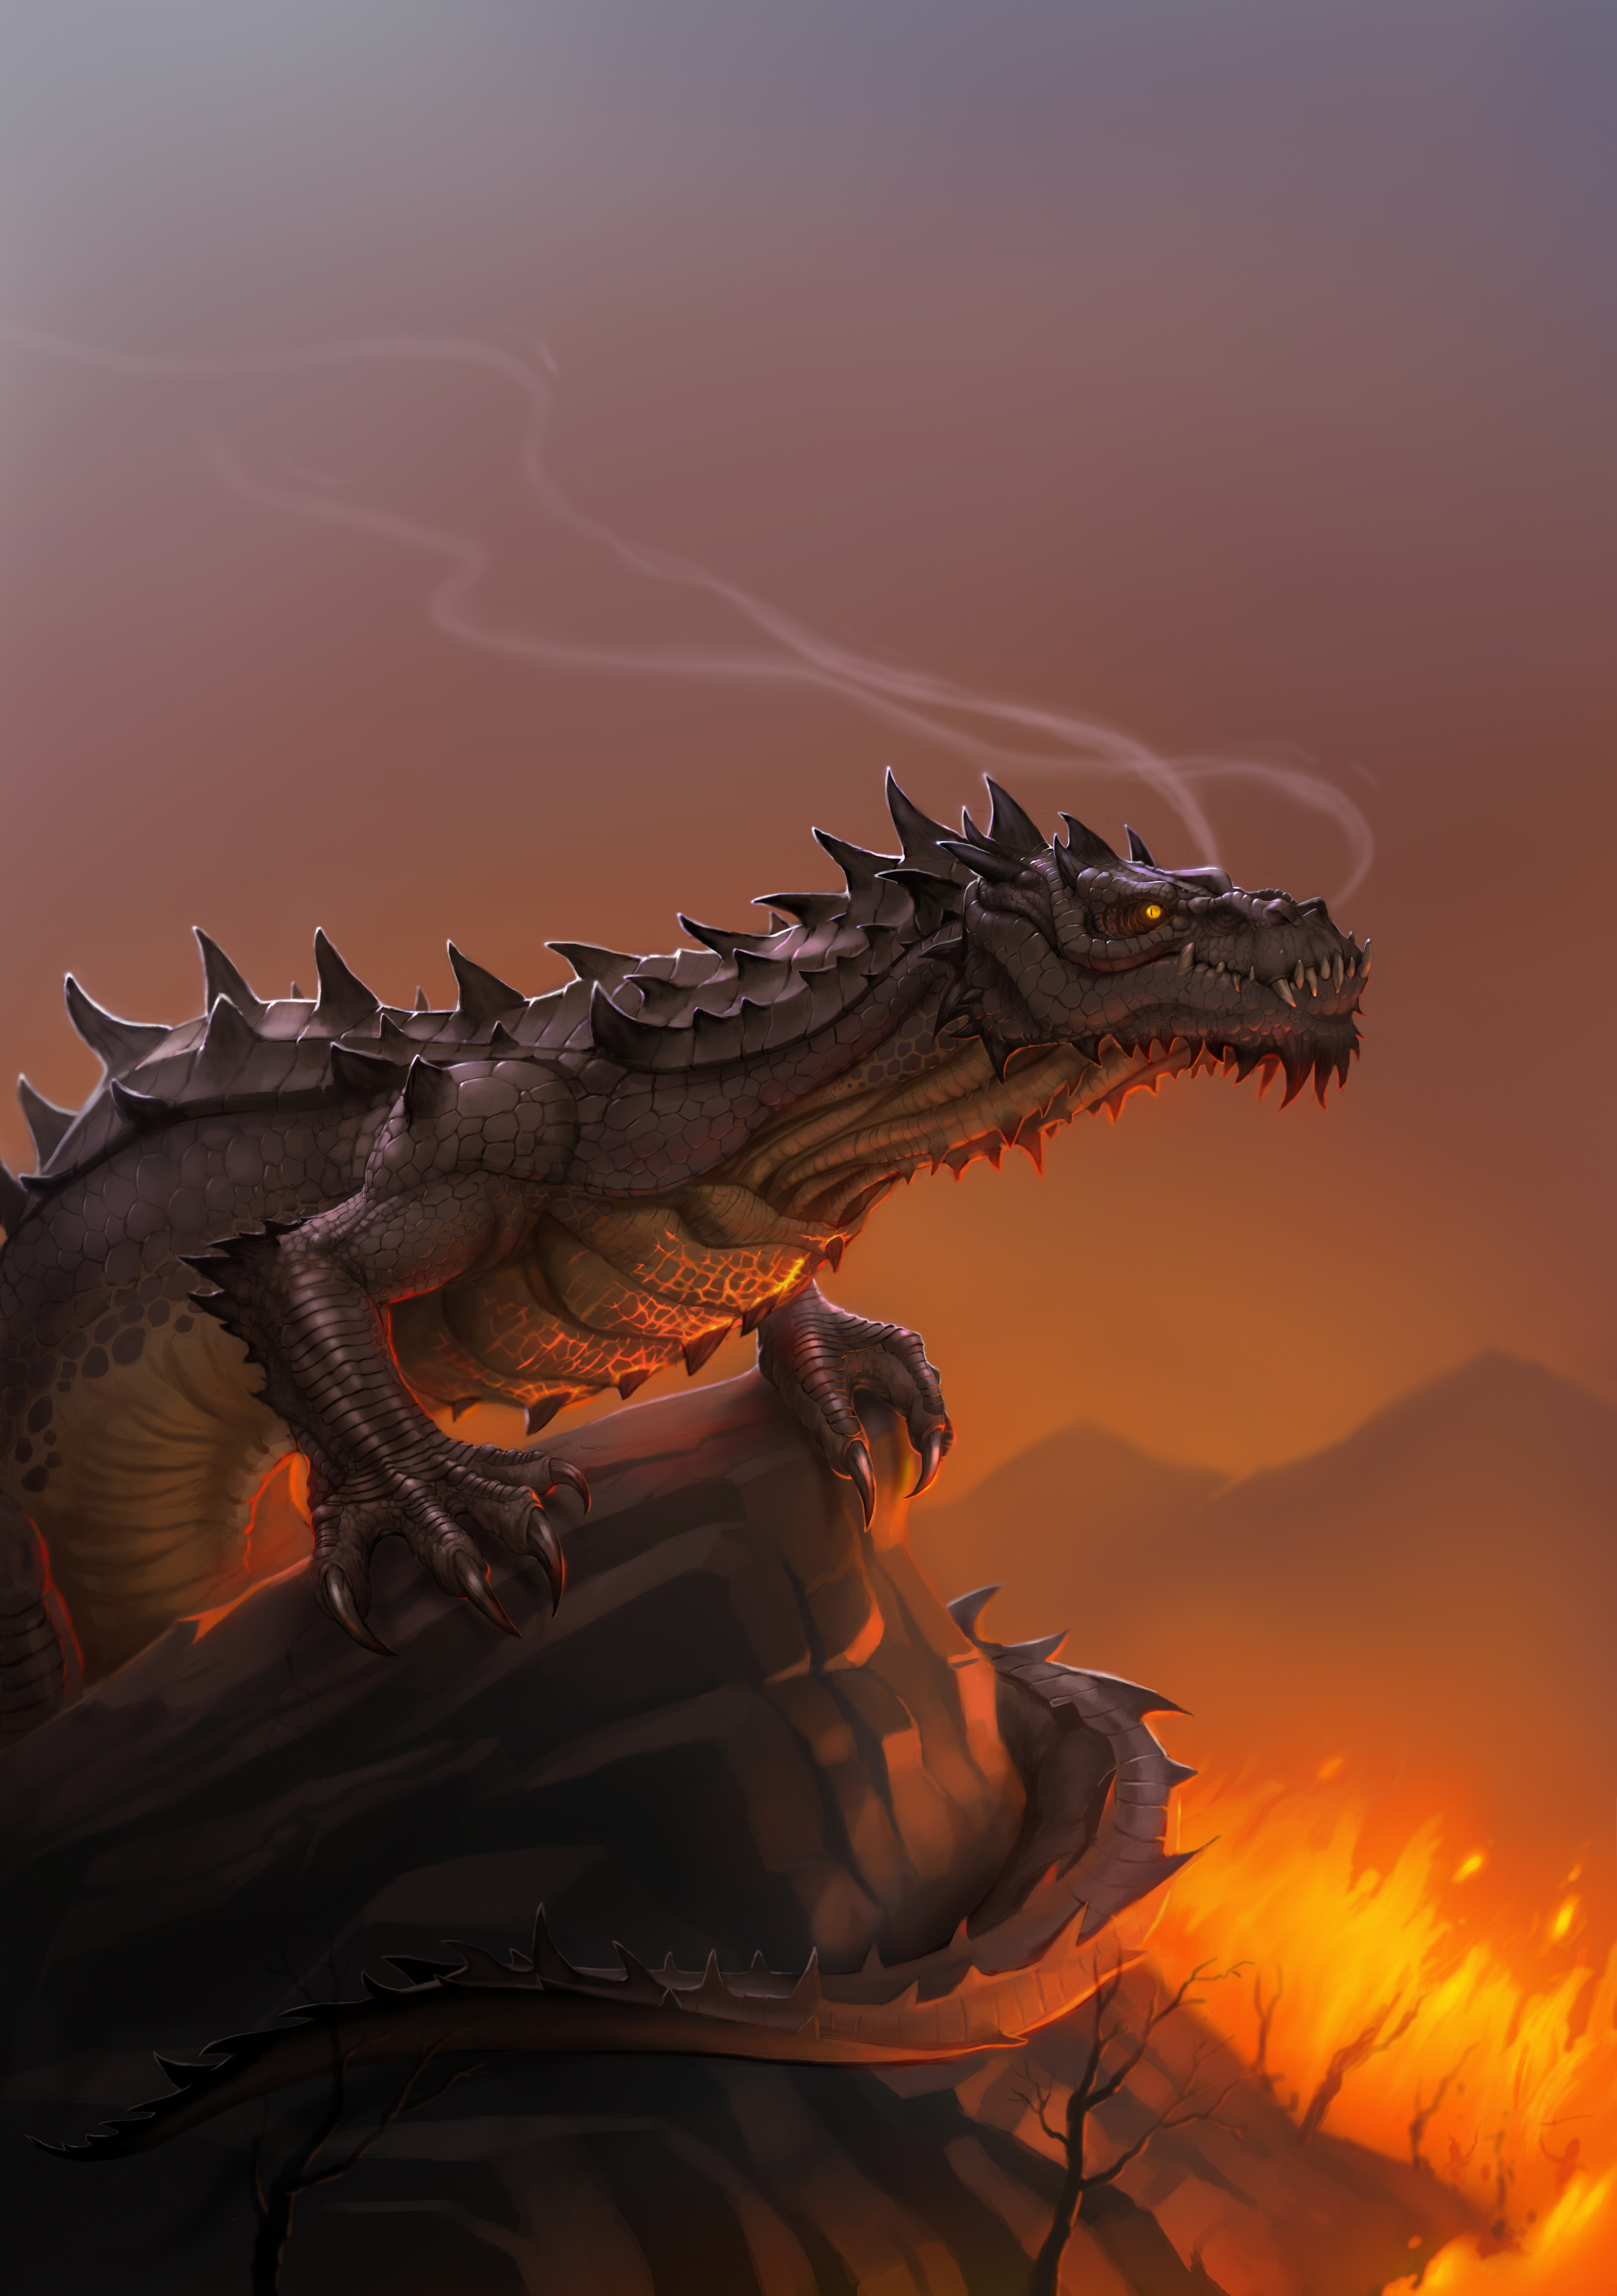 Glaurung the Dragon by sboterod on deviantART